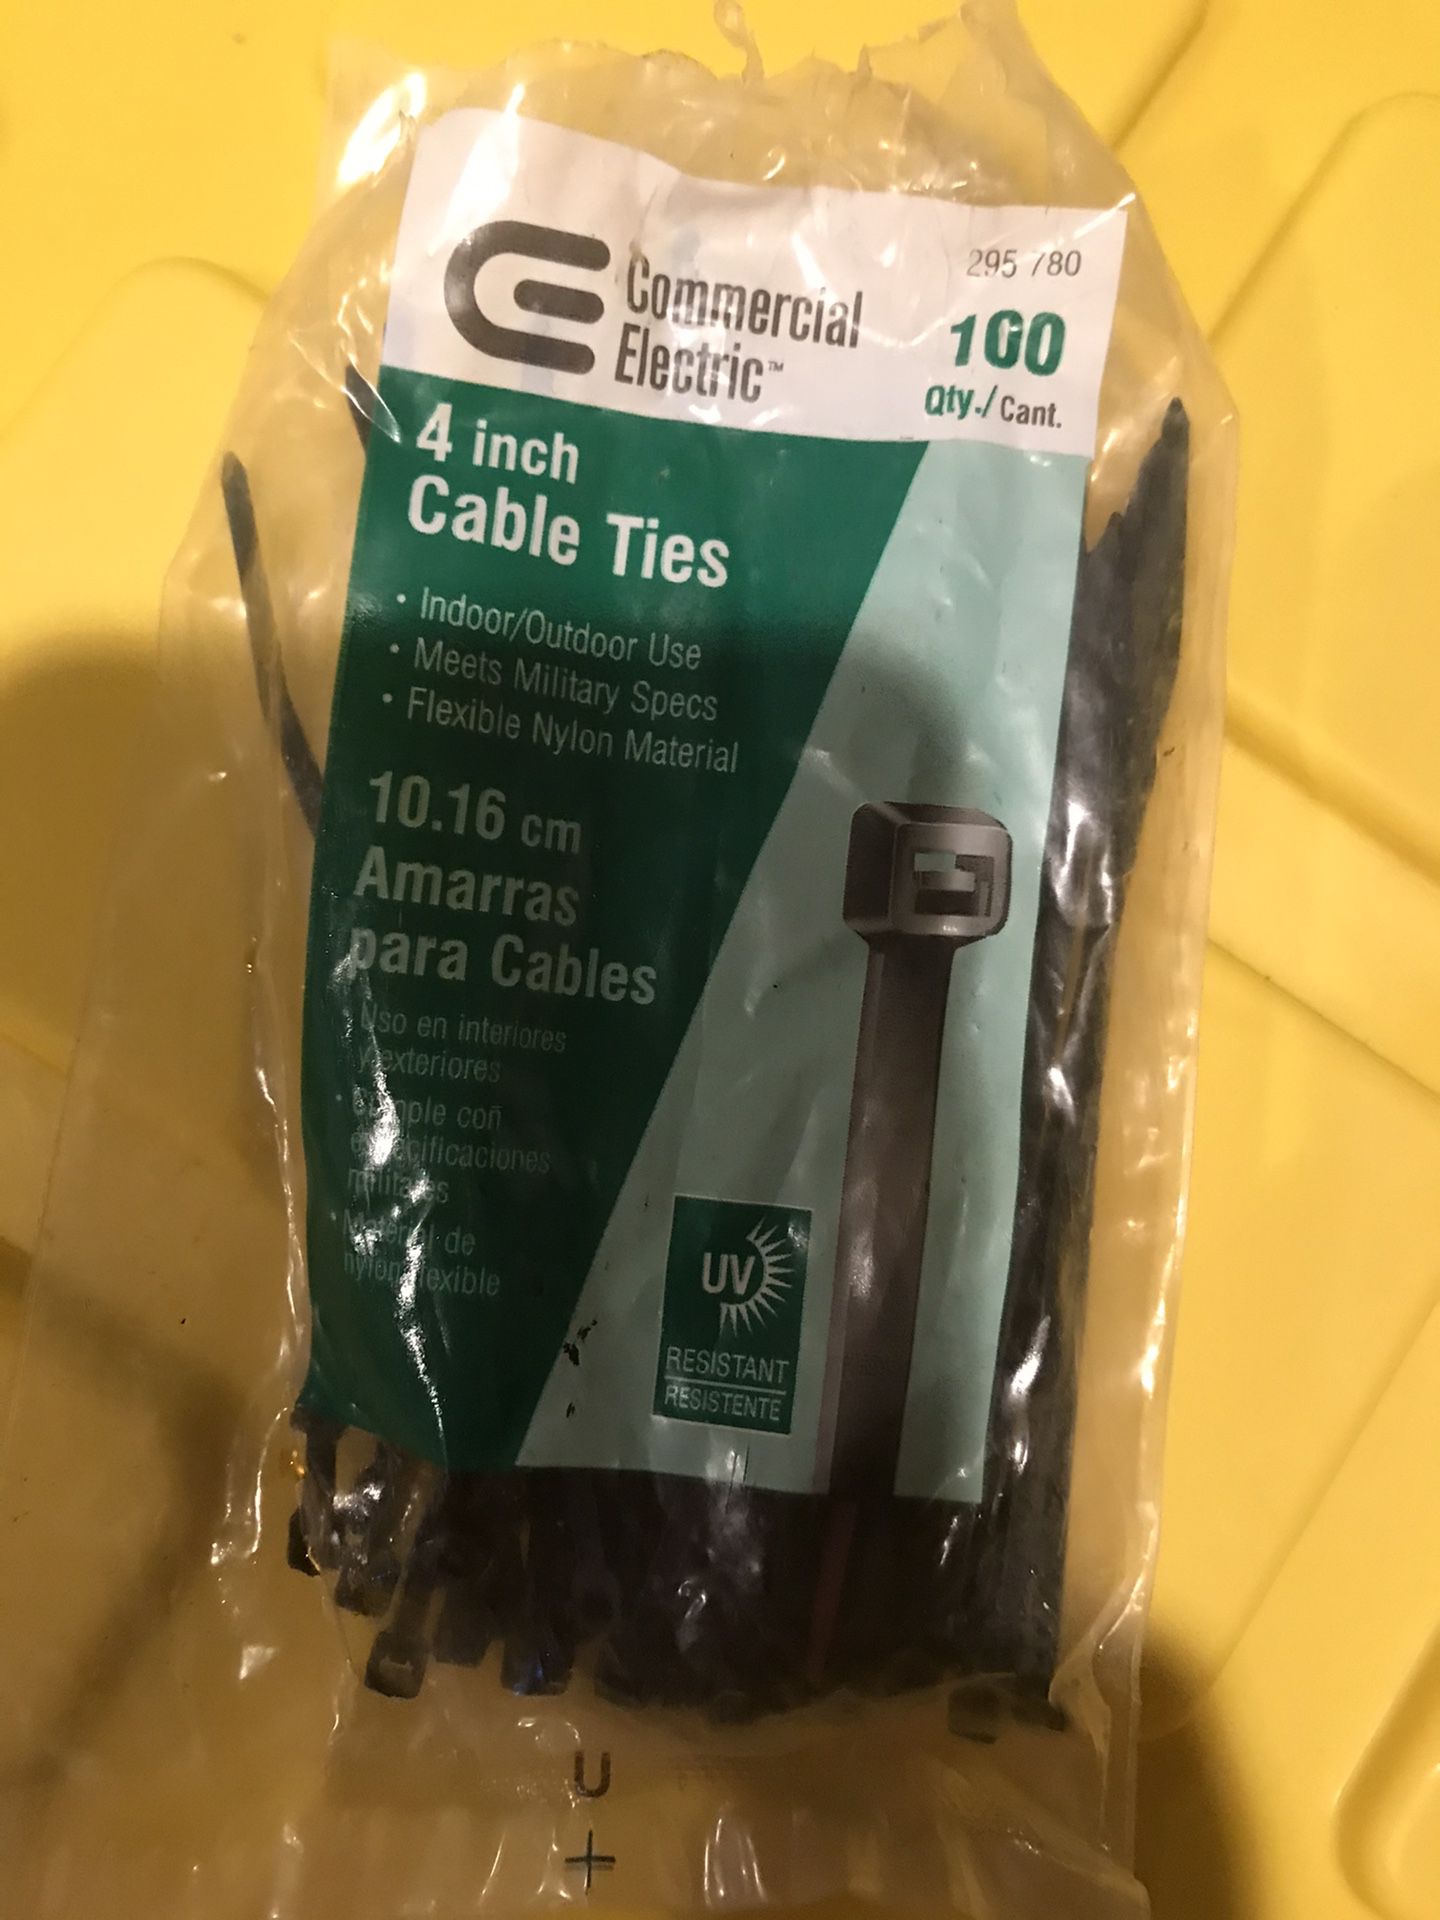 Commercial Electric 4" Cable Ties, Black ( 100 Pack)